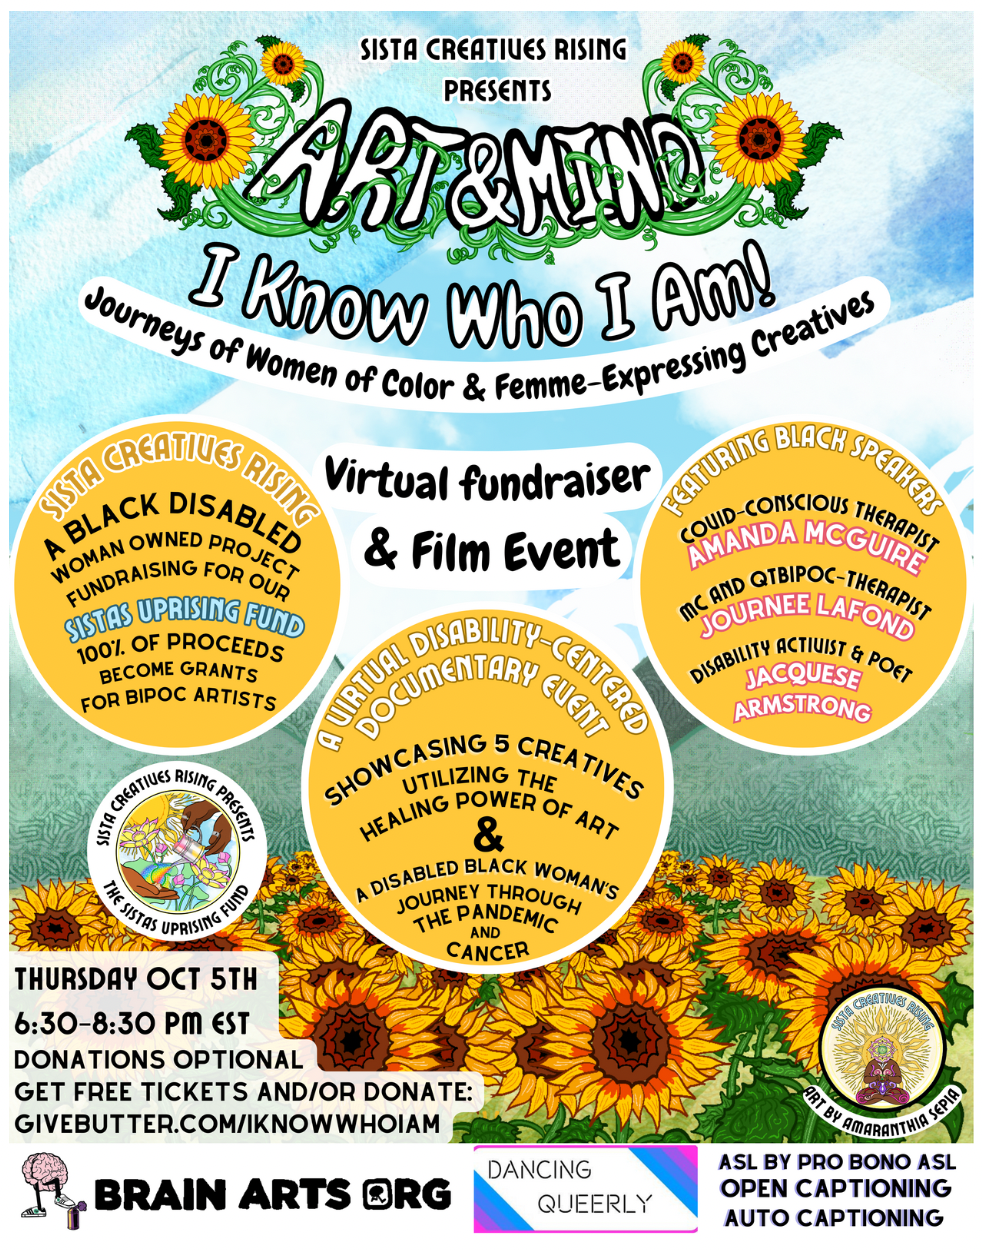 A flyer in a field of sunflowers with event info in a lot of text.